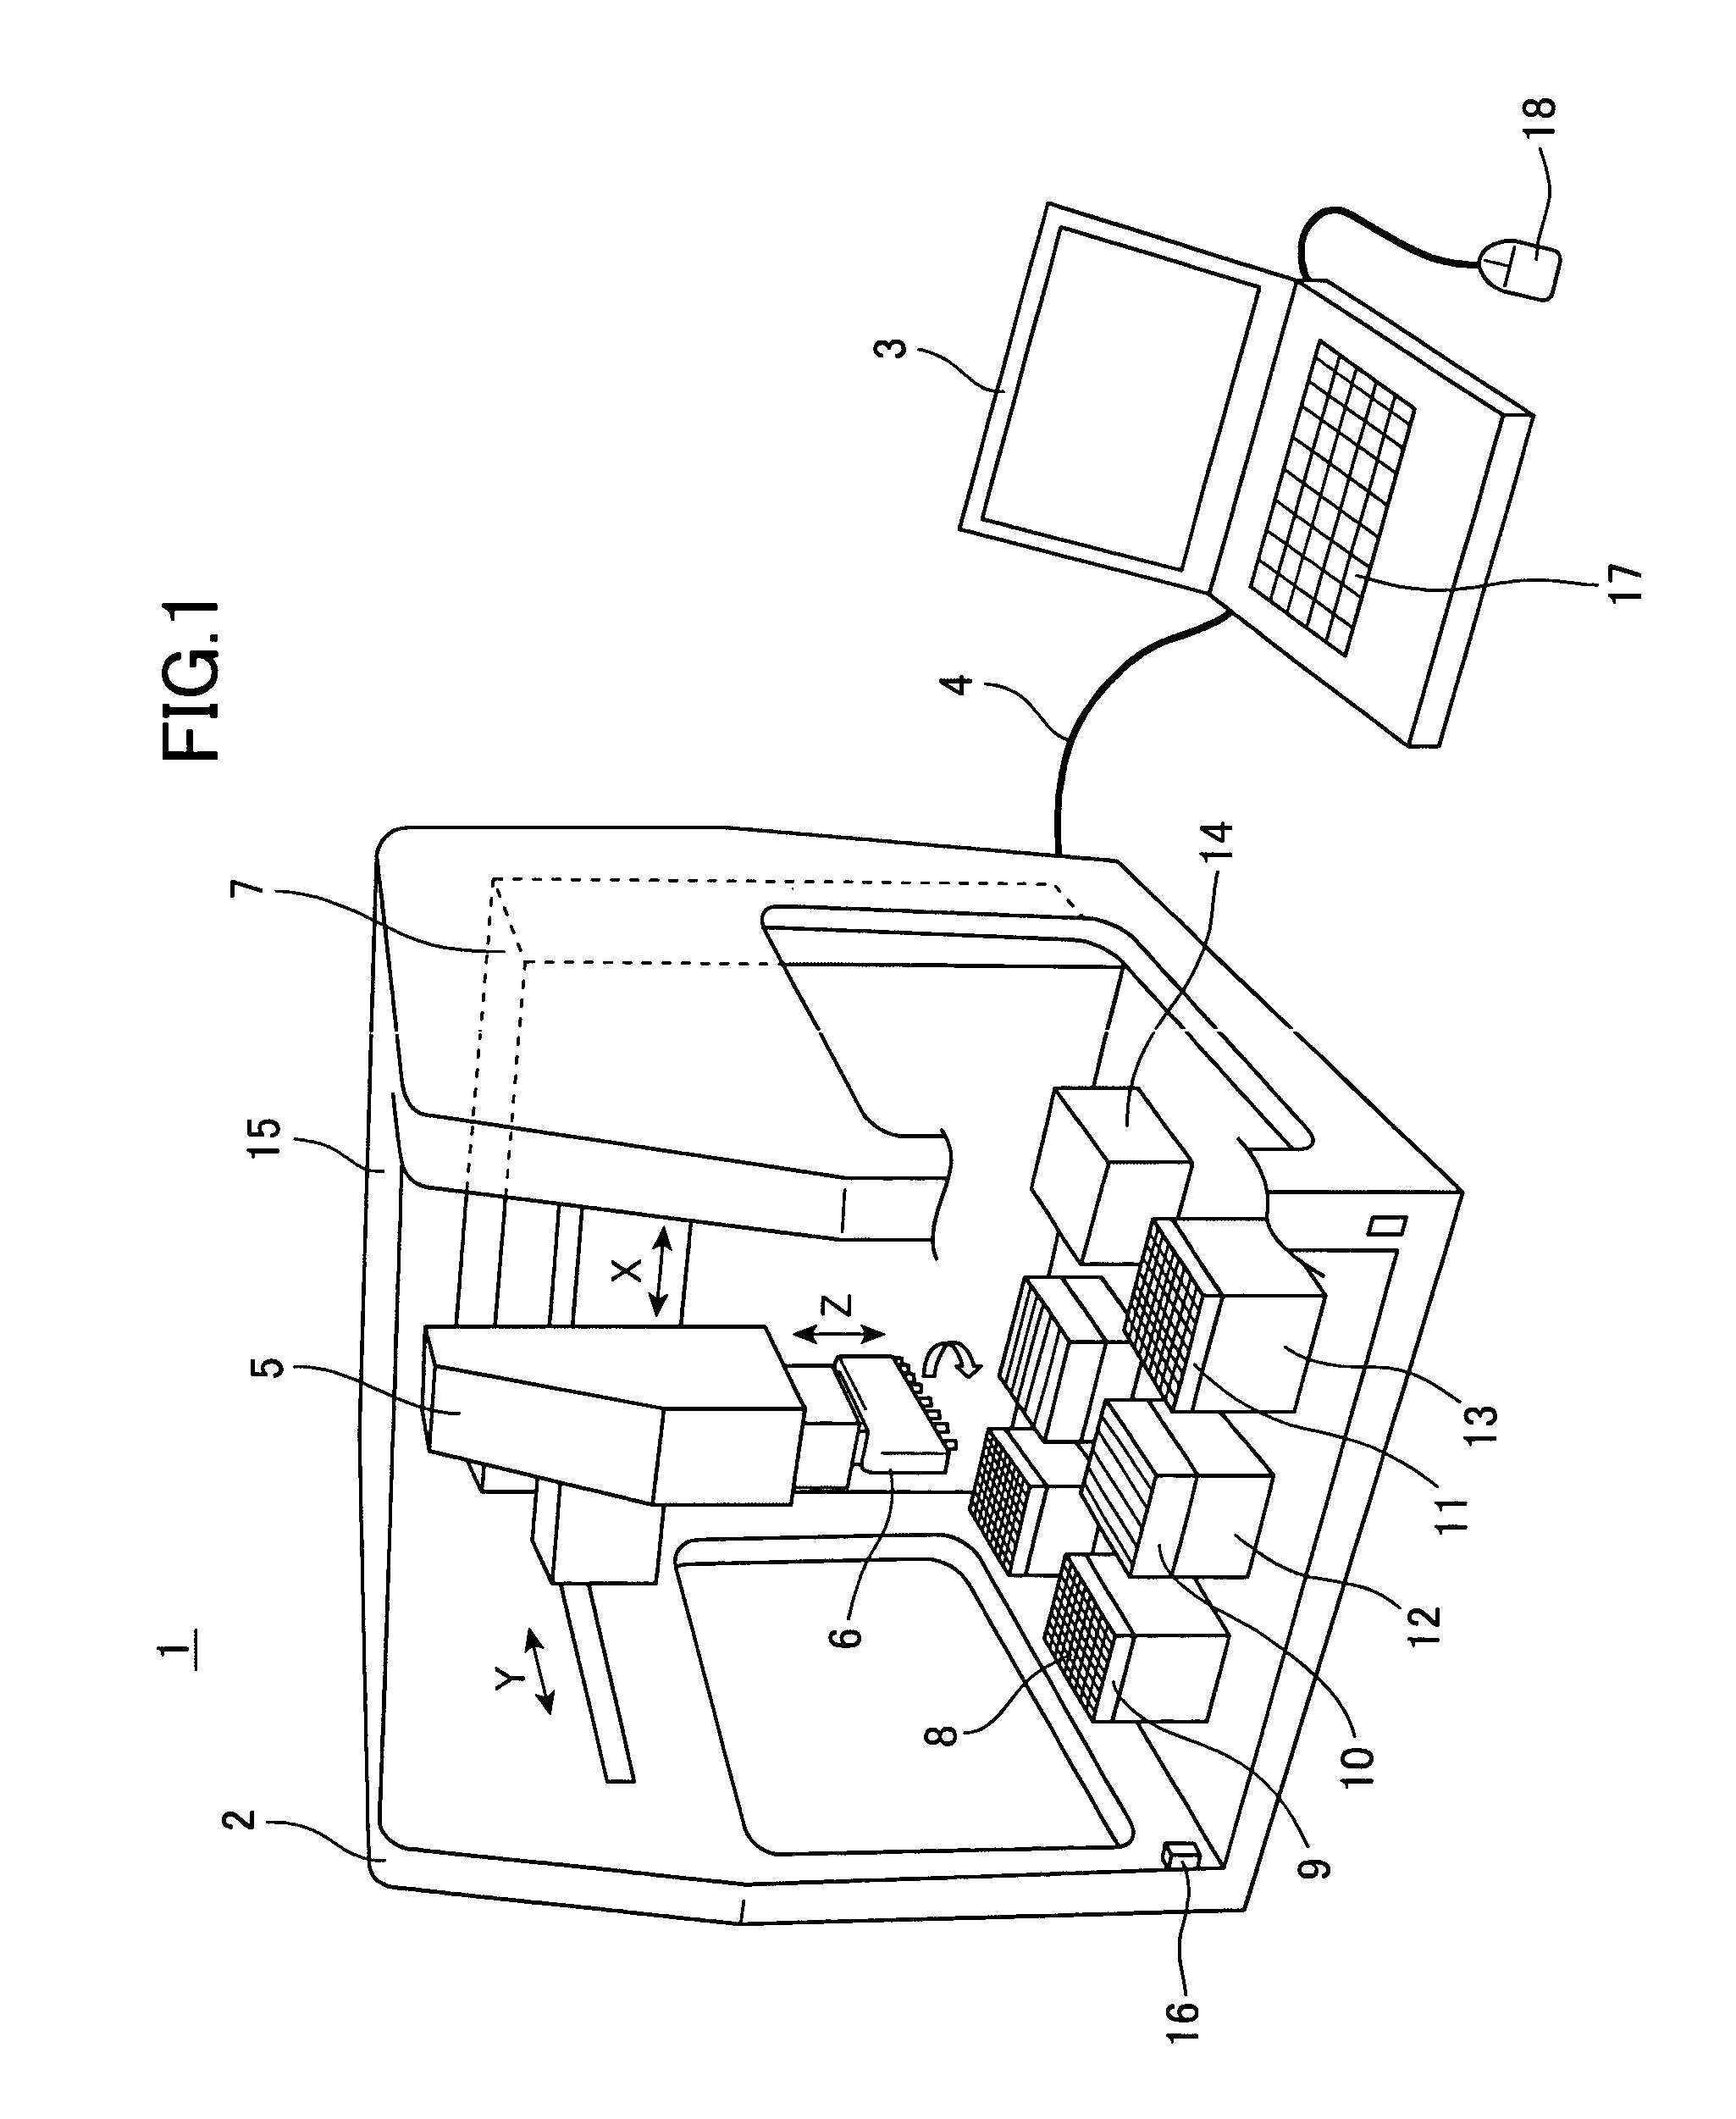 Control device for automatic liquid handling system